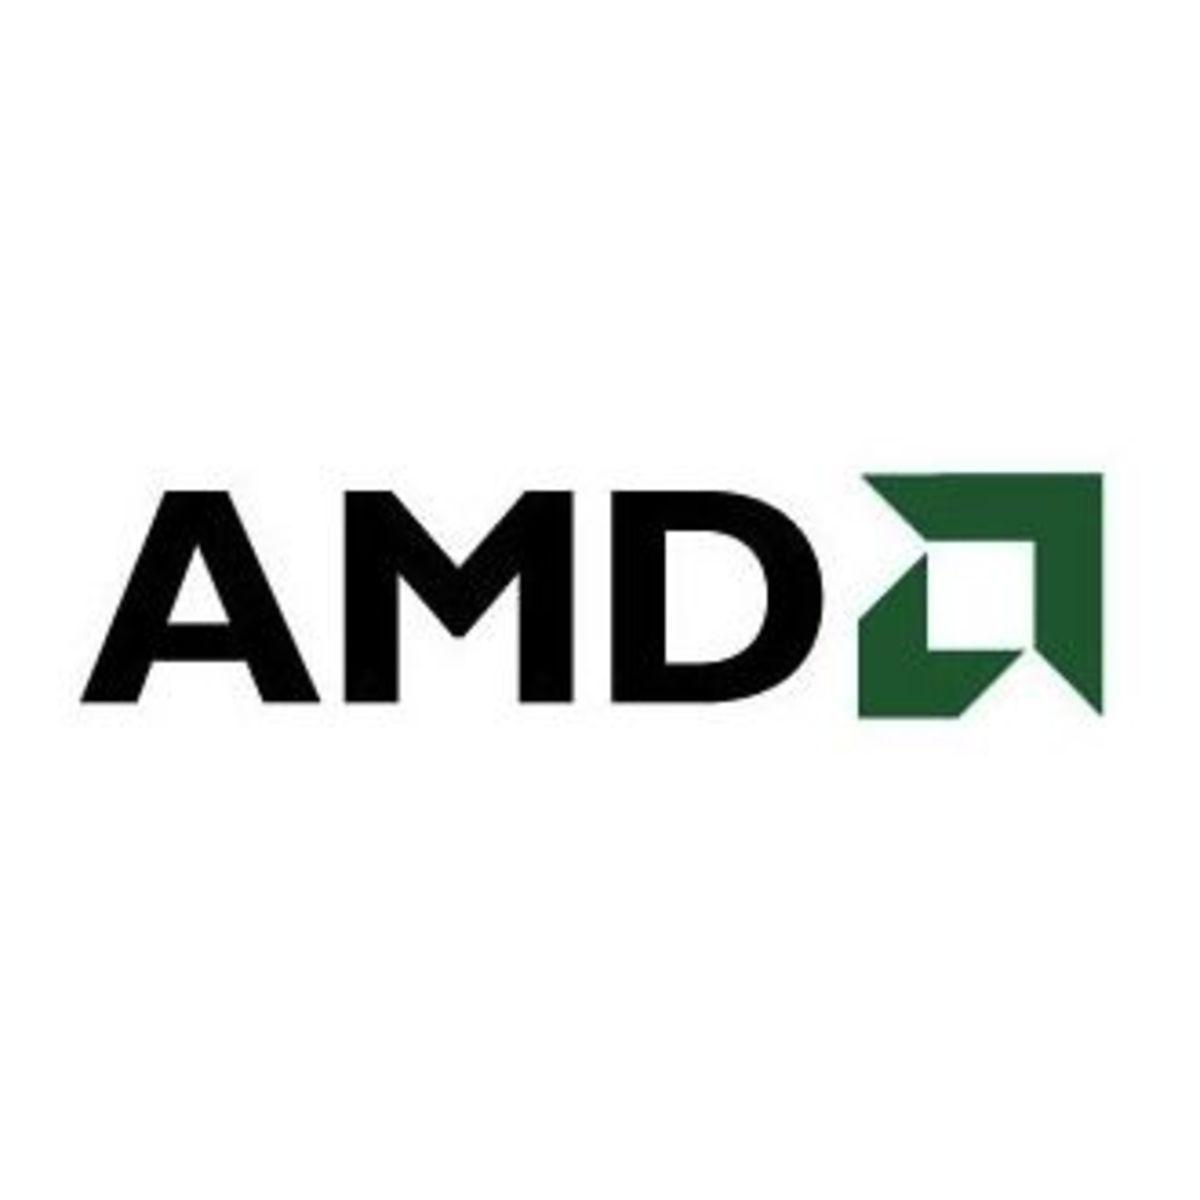 Green AMD Logo - AMD reports losses, will axe 15% of workforce